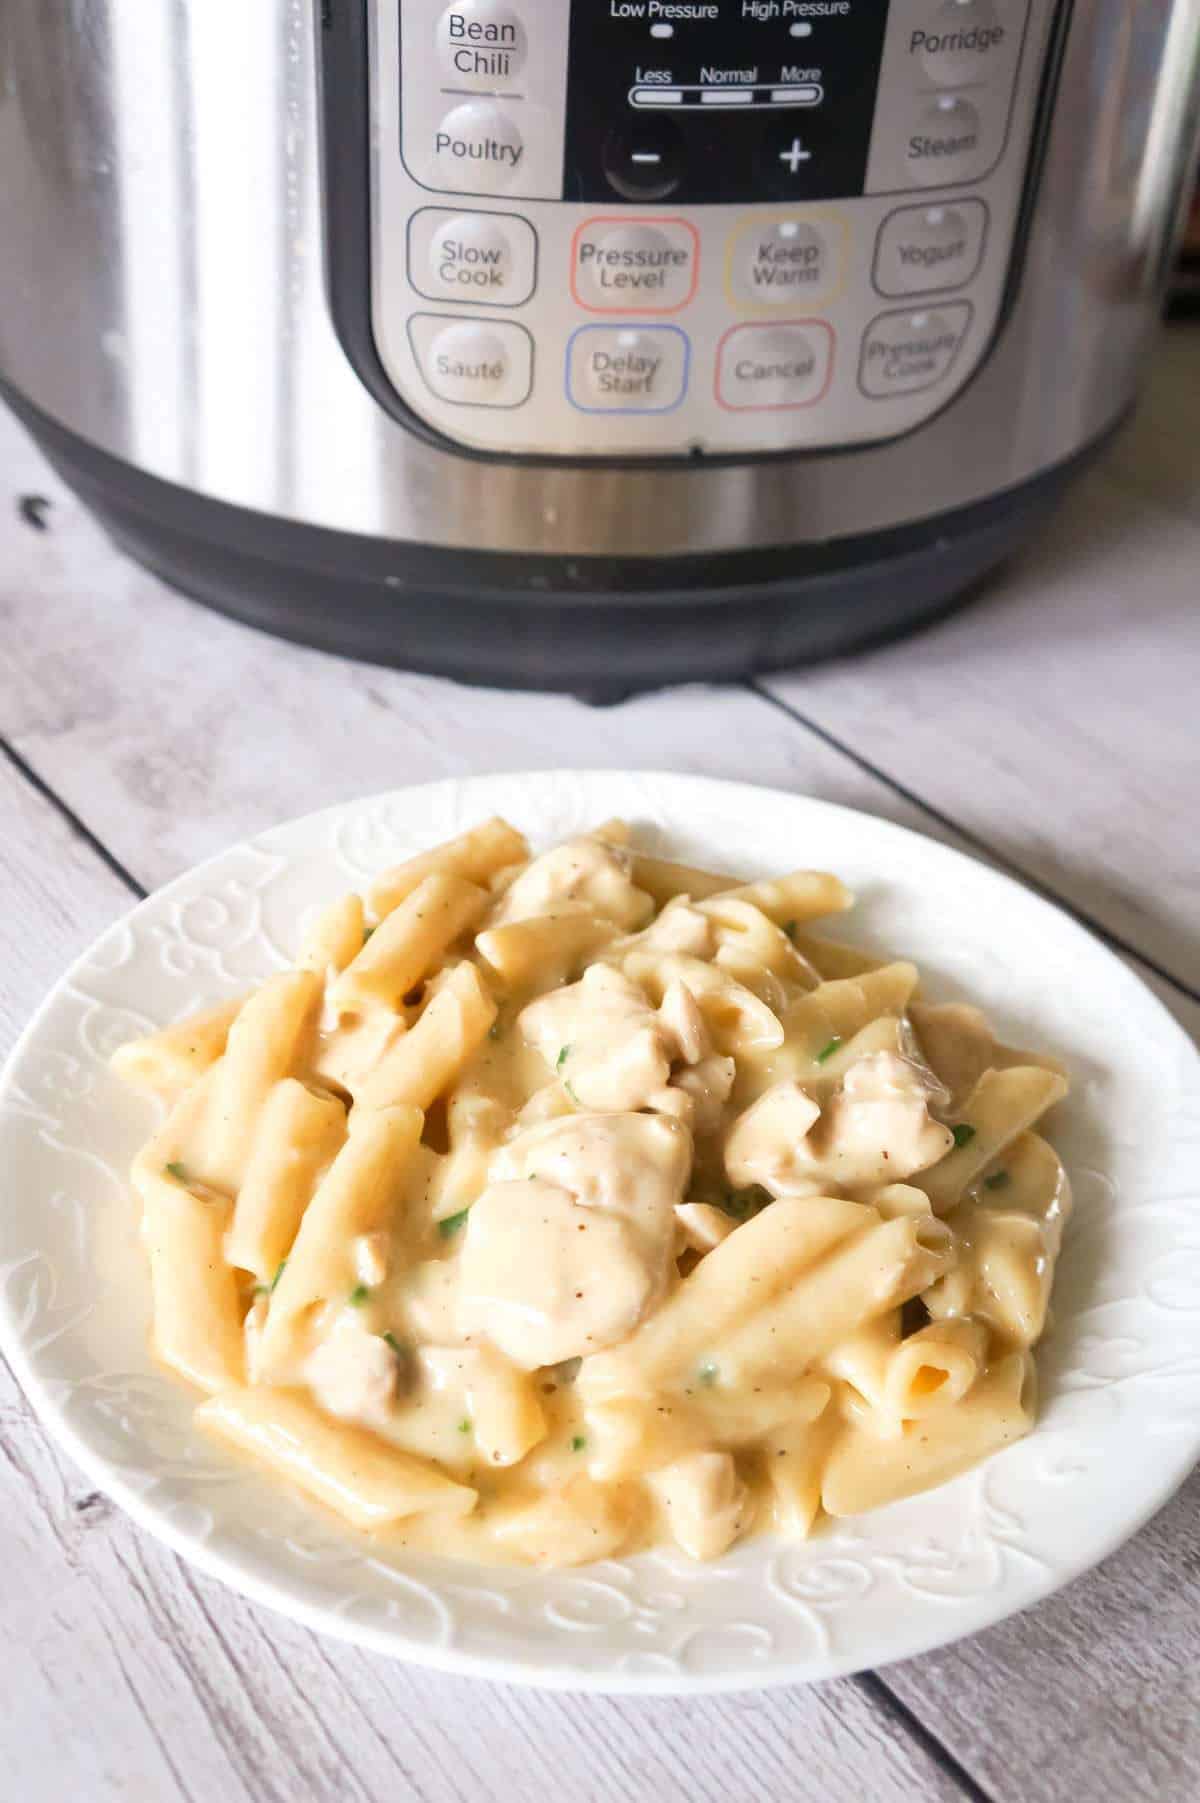 Instant Pot Garlic Parmesan Chicken and Pasta is a delicious pressure cooker pasta recipe loaded with chunks of chicken breast in a creamy Parmesan cheese sauce.